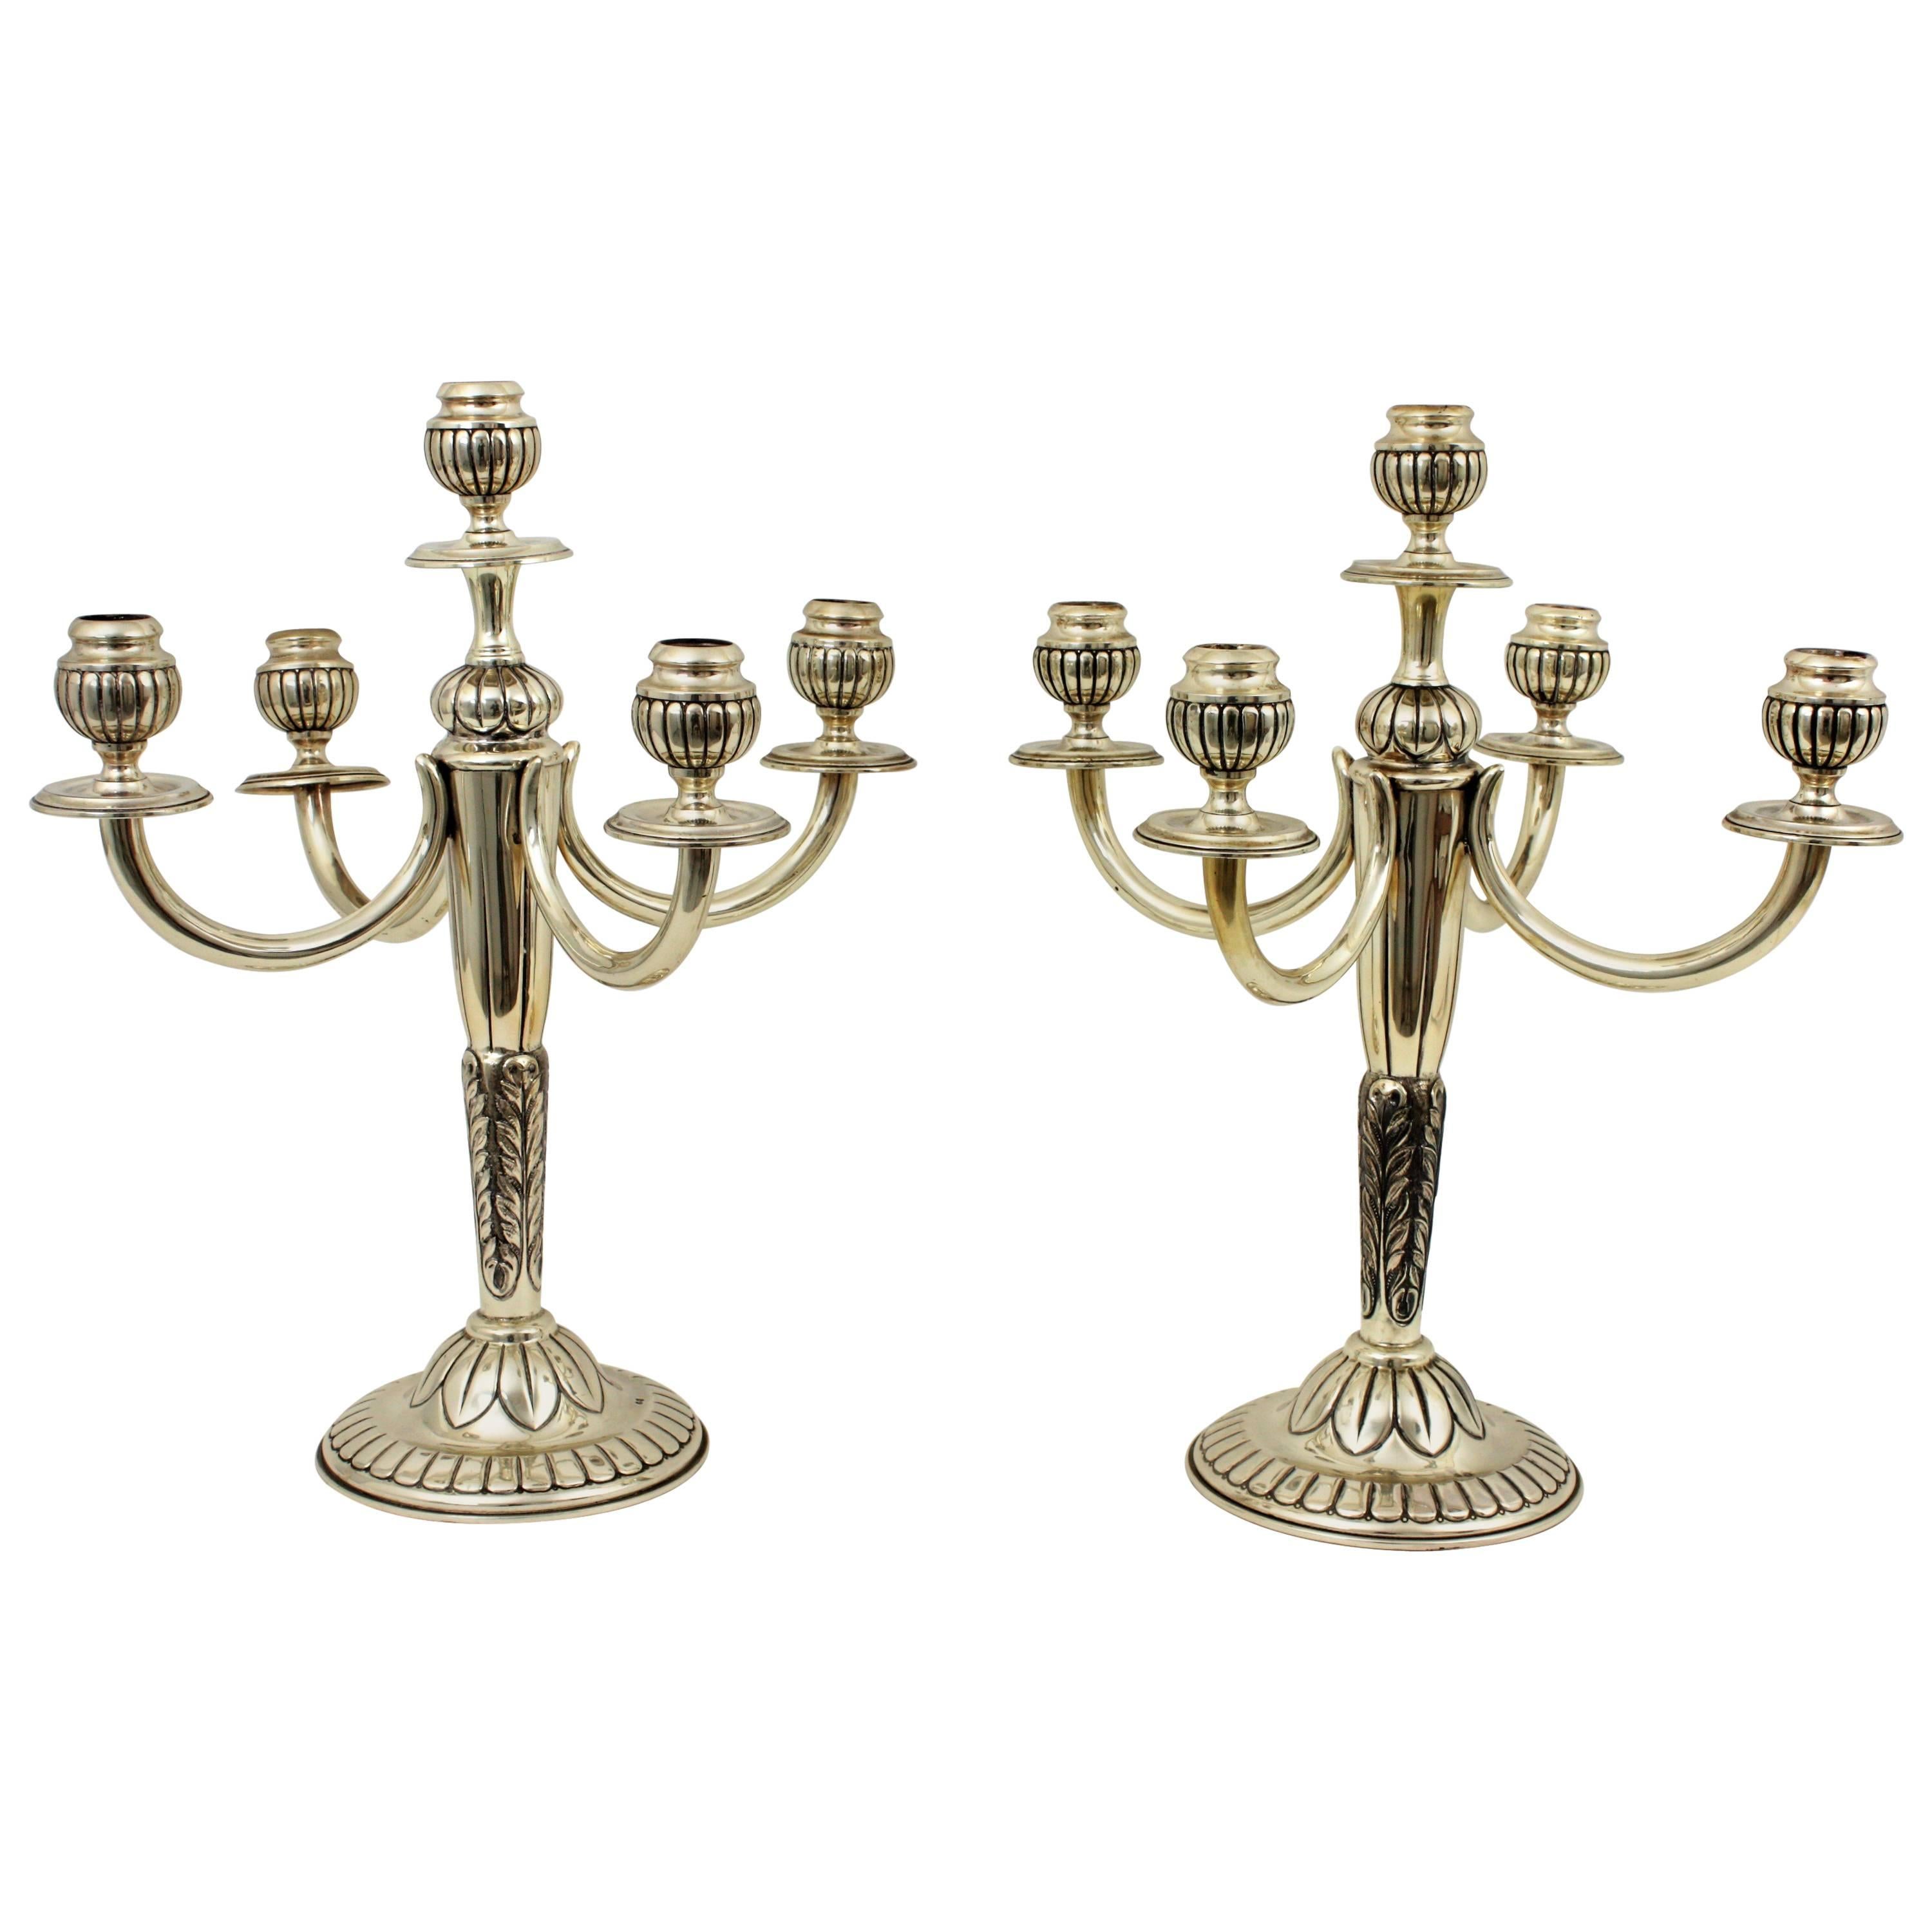 Pair of Mid-20th Century Spanish Sterling Silver Five-Light Candelabra